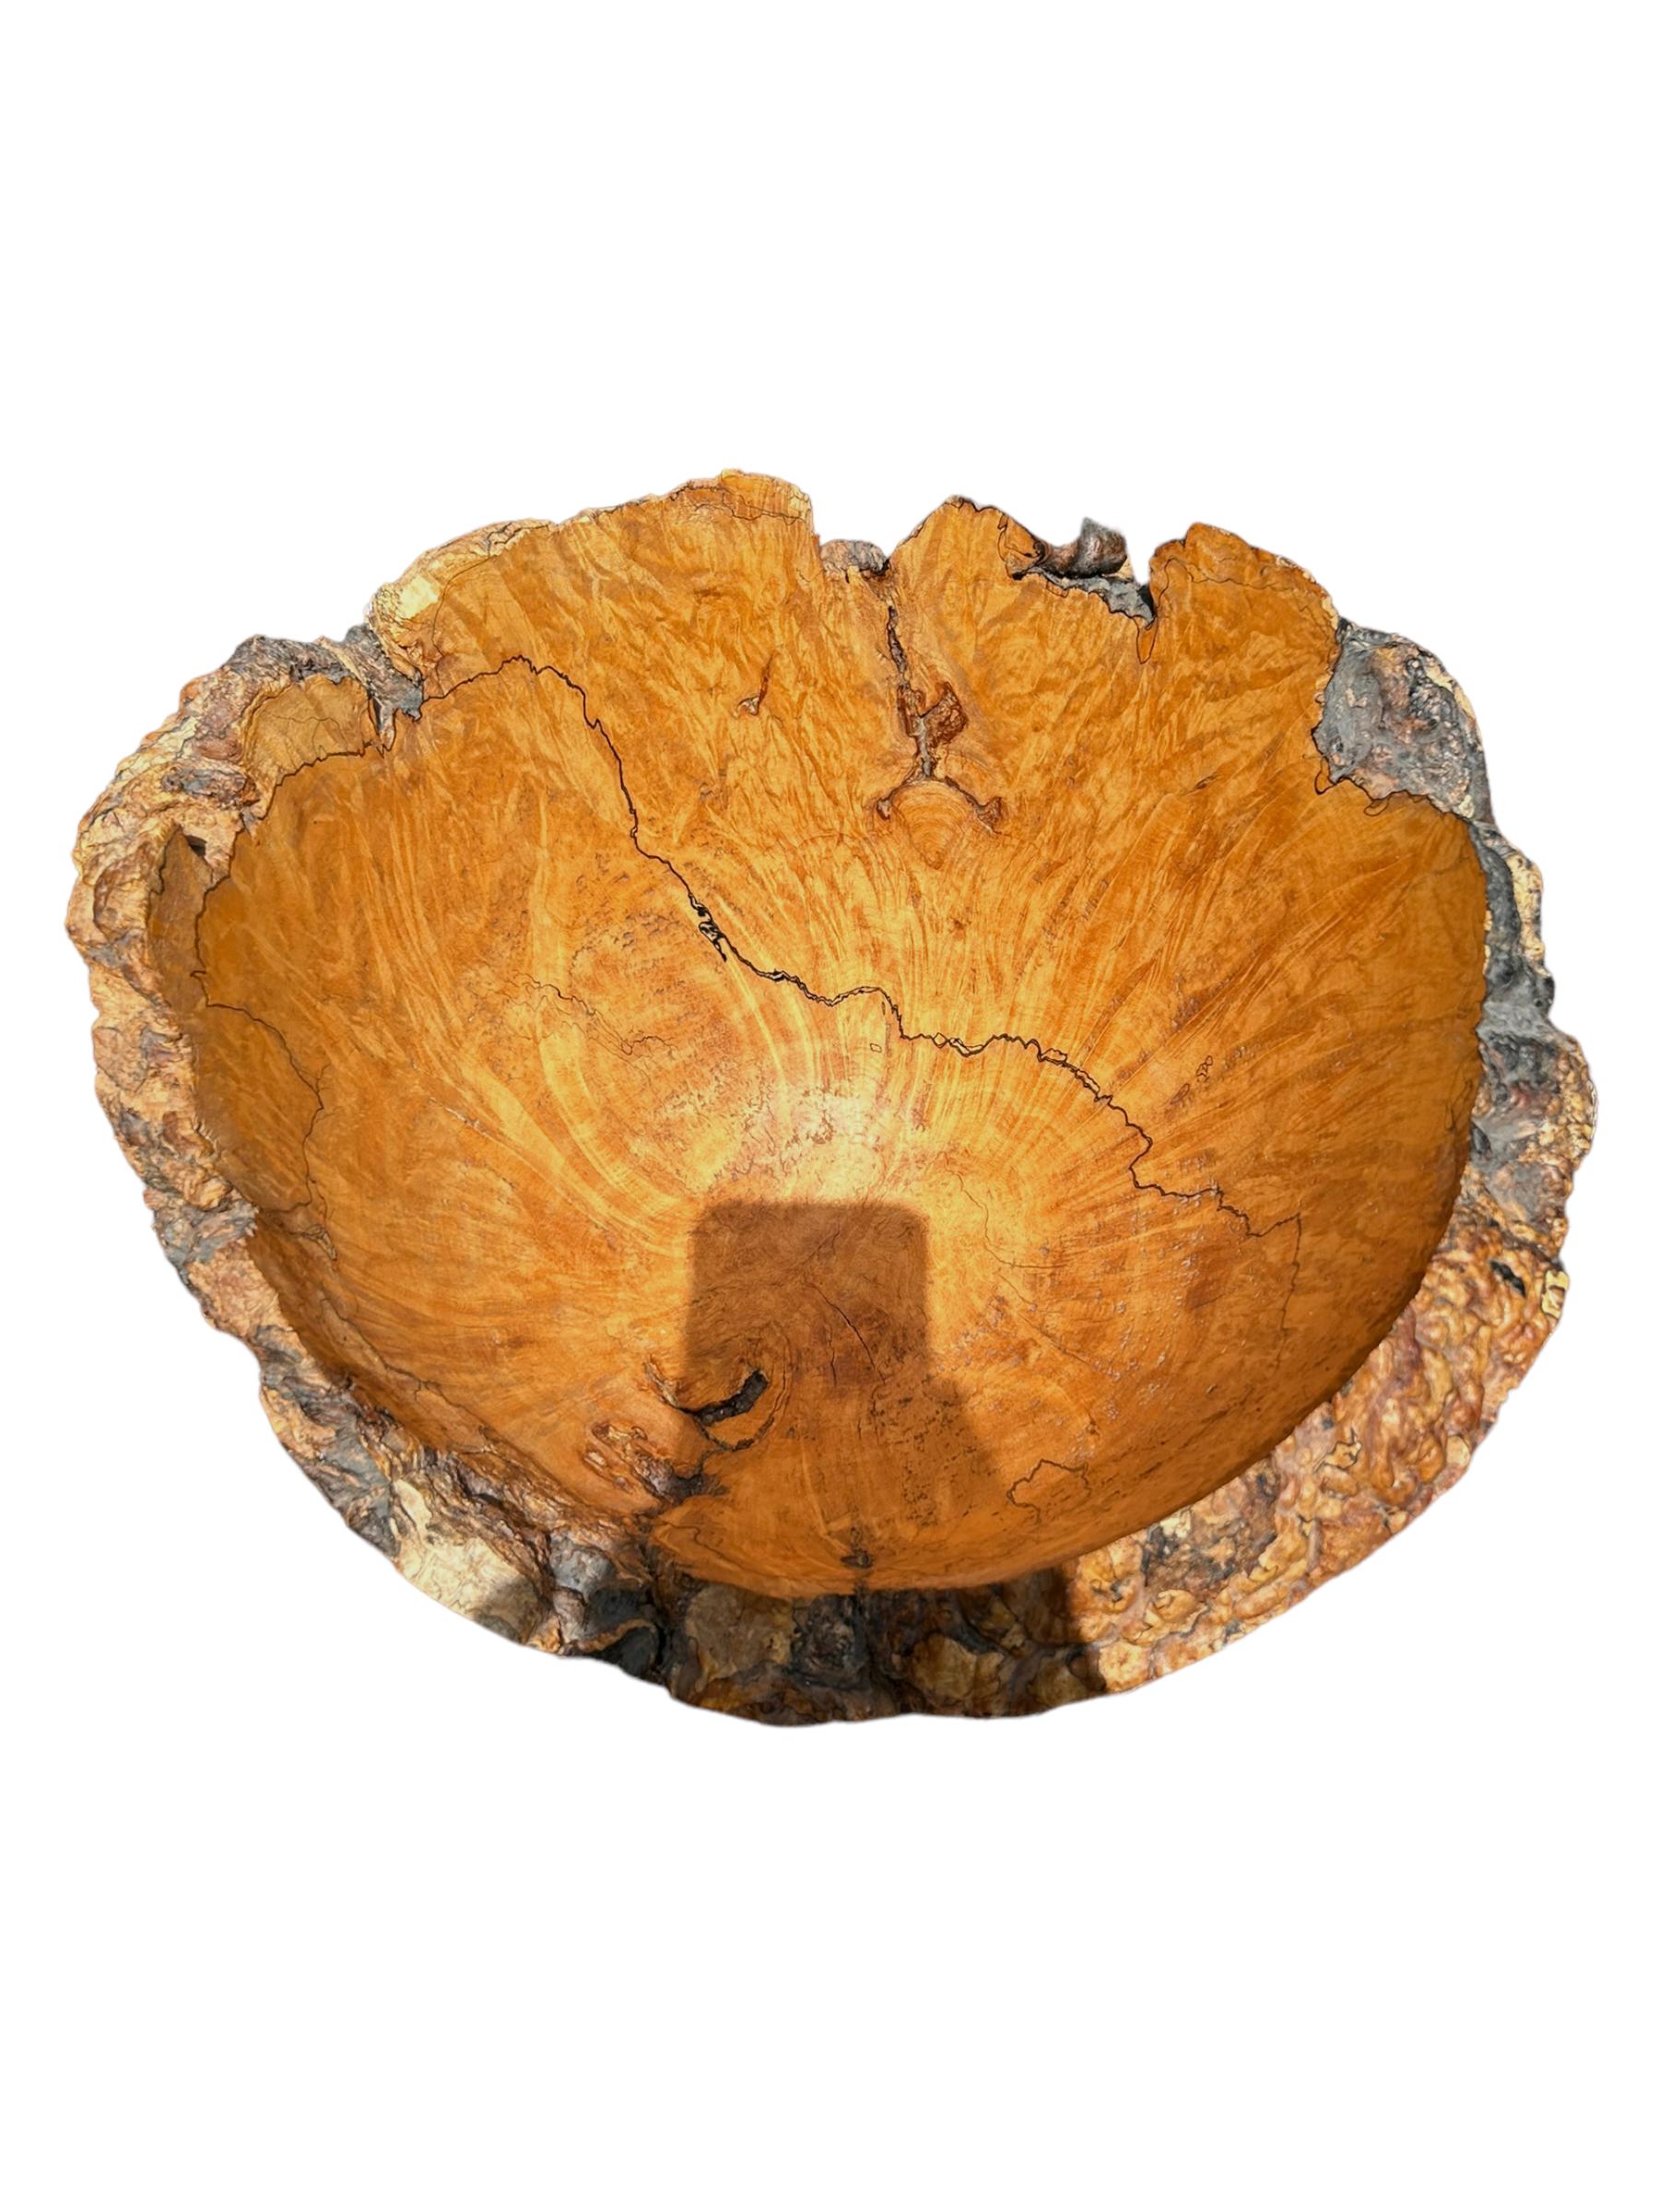 This vintage burl bowl is a unique addition to any collection or kitchen.  Hand-turned by Maurice Gamblin in New Brunswick, Canada.  It showcases a beautiful natural pattern that makes it perfect for display or use.  The bowl is crafted with